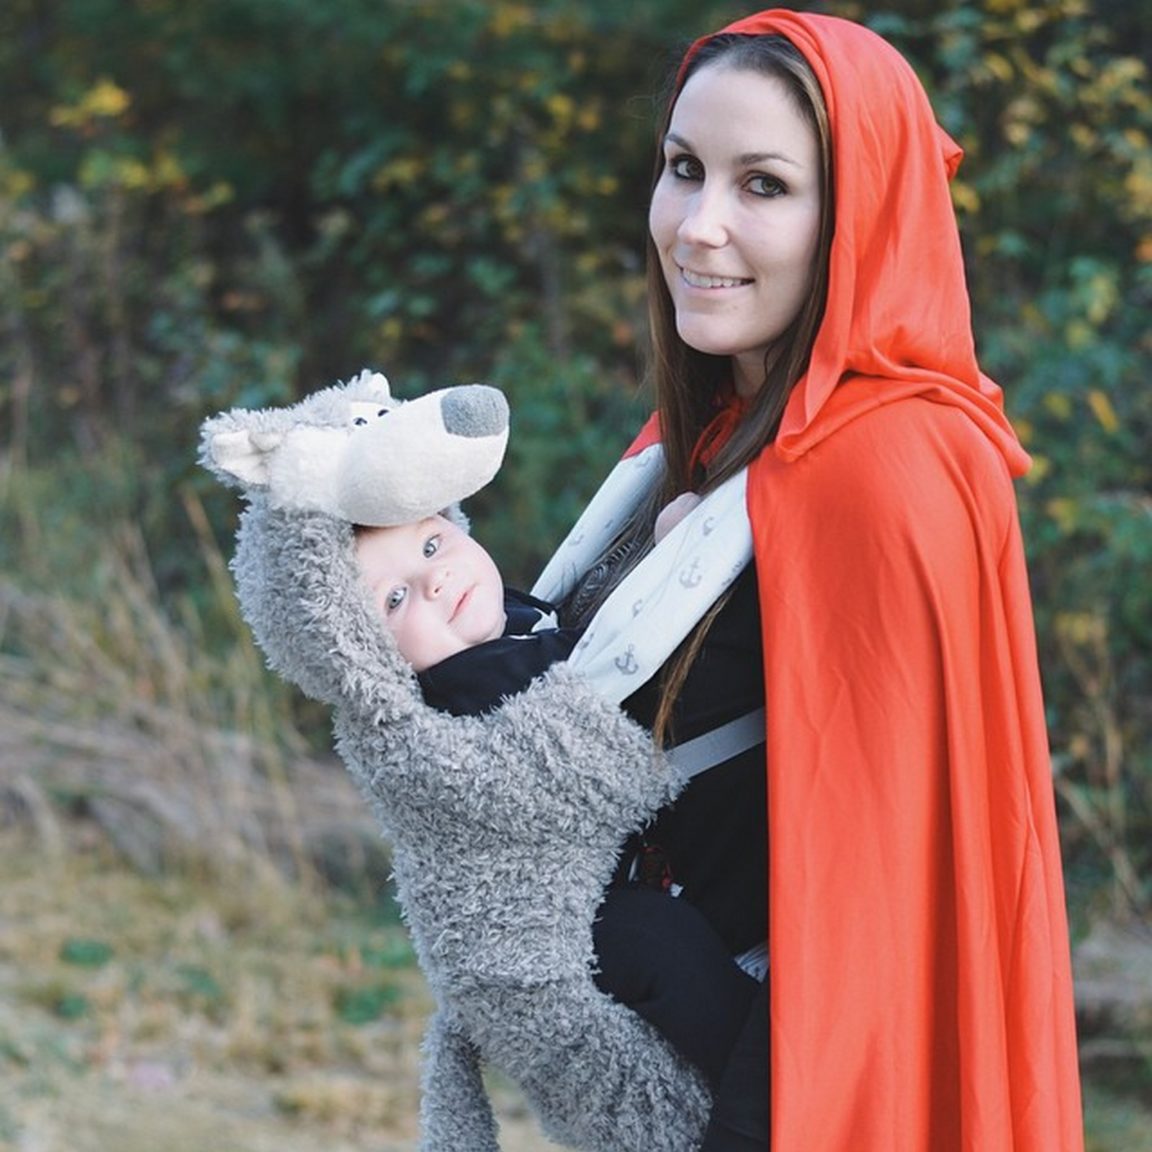 17 Funny Halloween Costumes for Babies and Parents